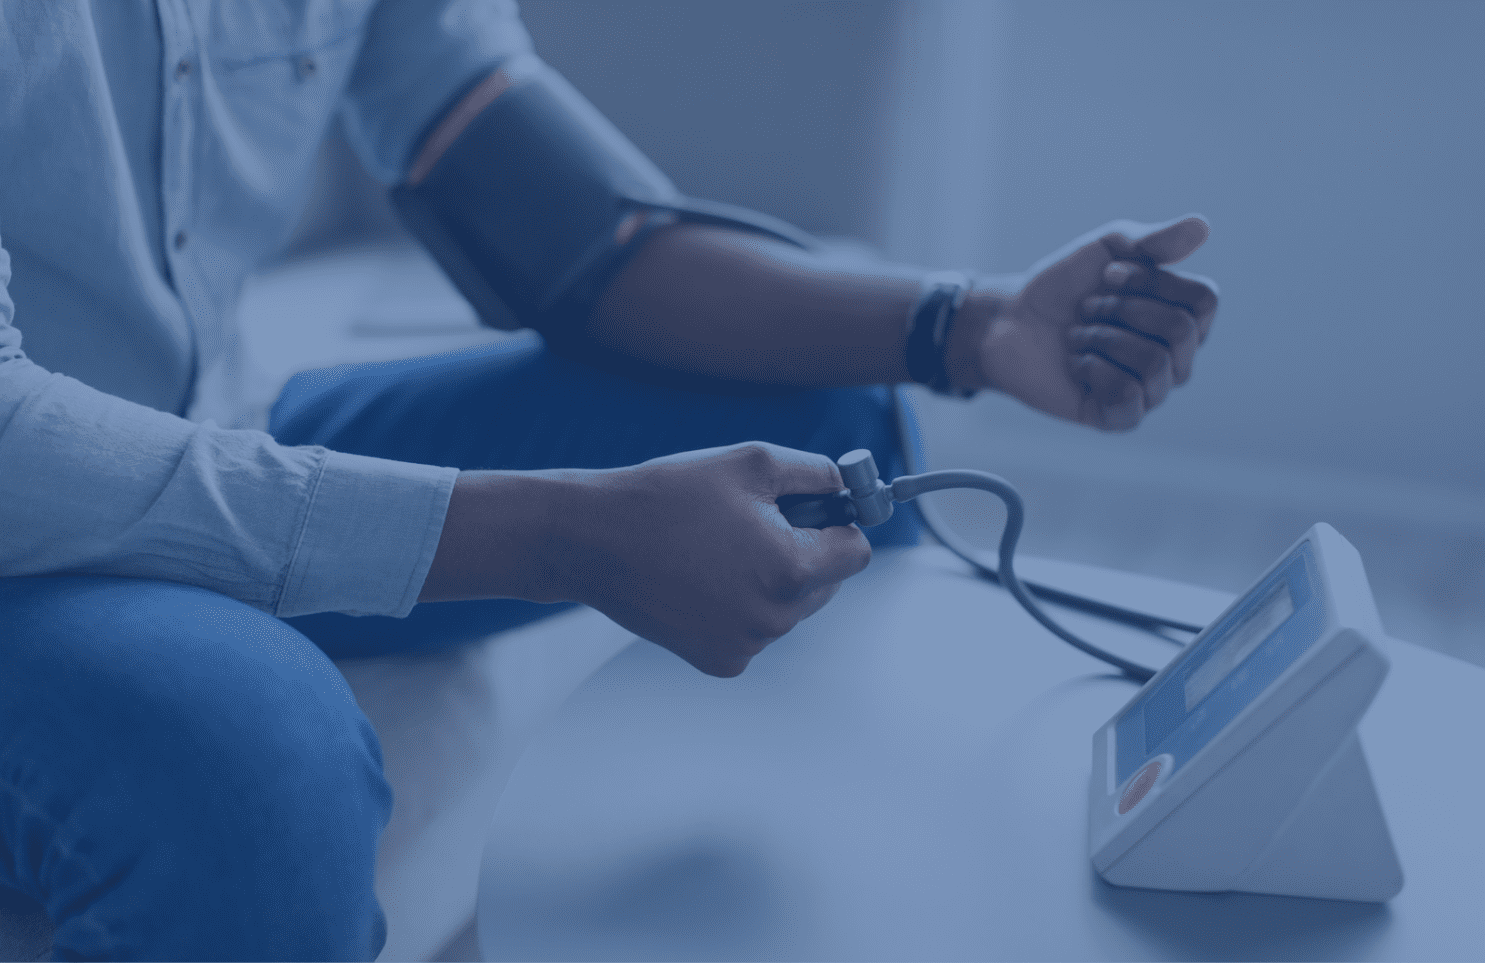 Valor Healthcare Awarded Contract to Provide Remote Patient Monitoring Services for the U.S. Department of Veterans Affairs